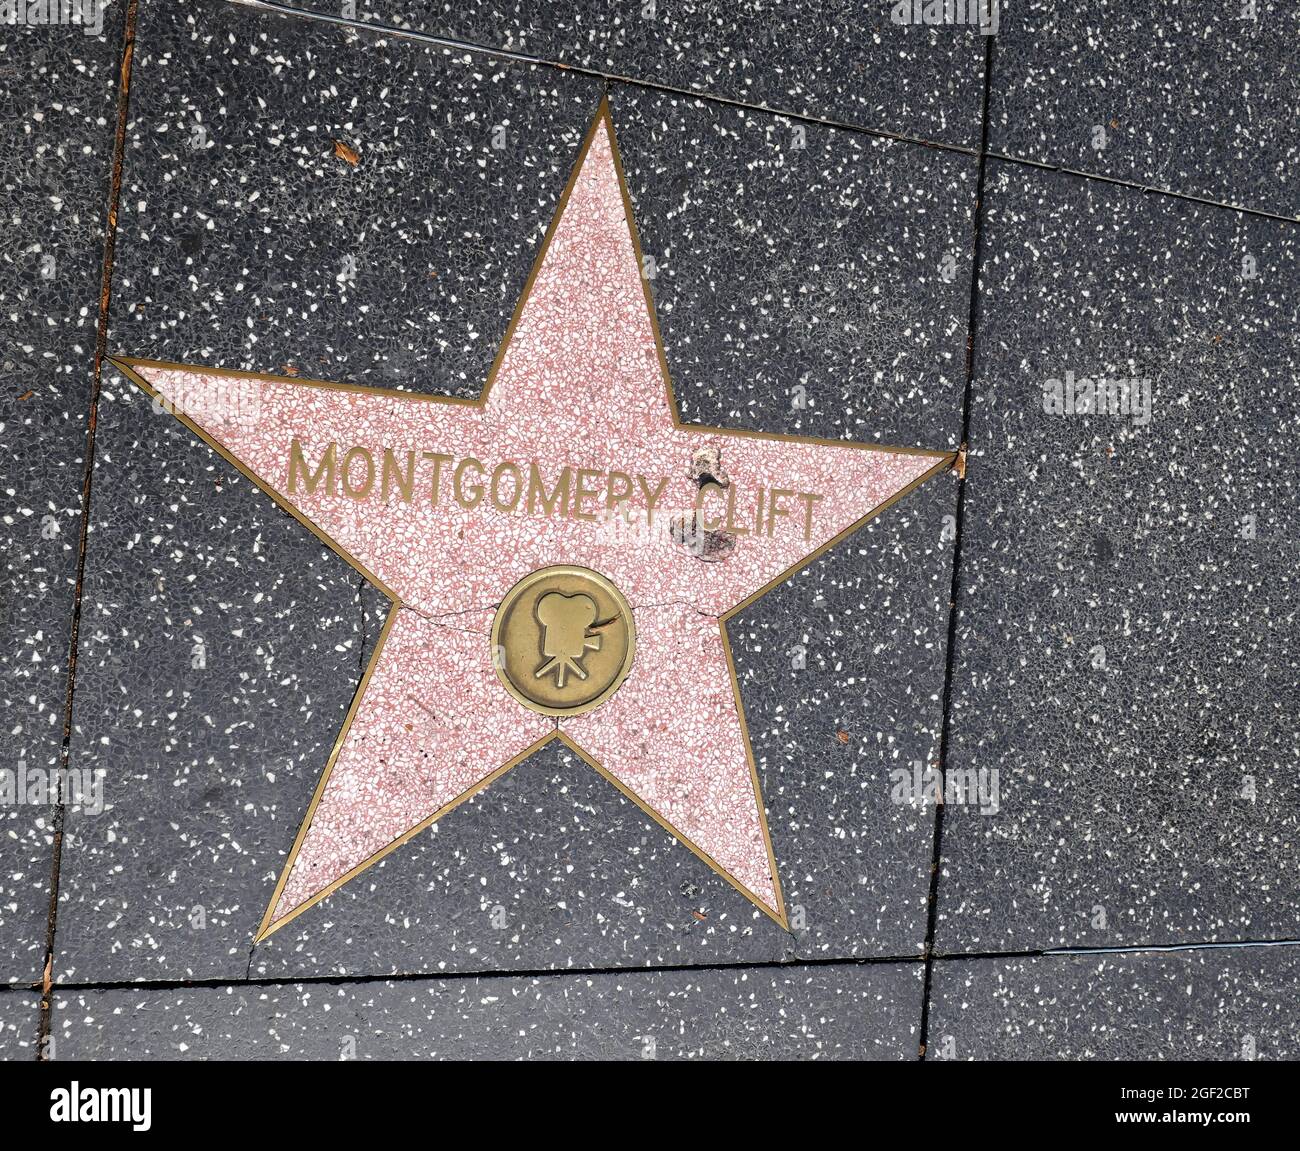 Hollywood, California, USA 17th August 2021 A general view of atmosphere of actor Montgomery Clift's Star on Hollywood Walk of Fame on August 17, 2021 in Hollywood, California, USA. Photo by Barry King/Alamy Stock Photo Stock Photo